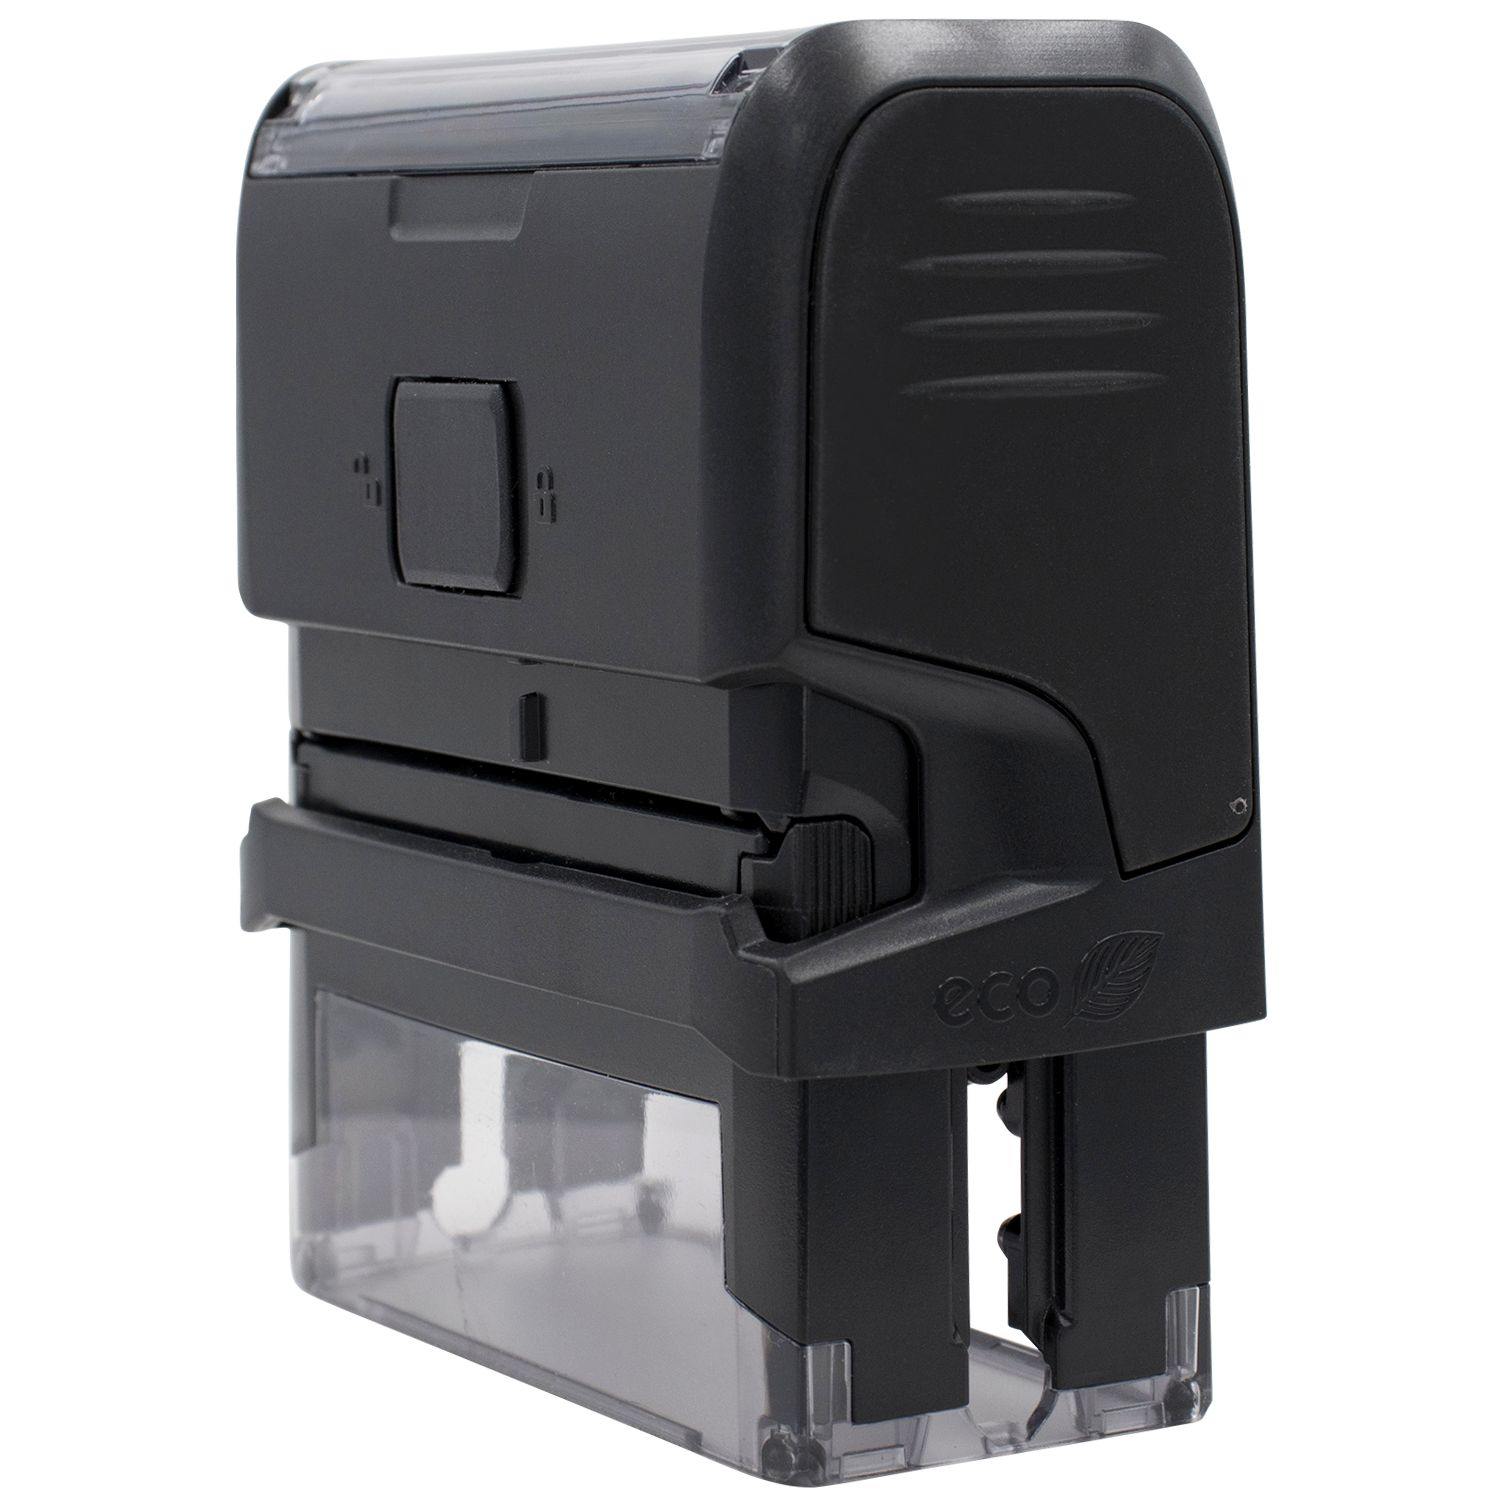 Self-Inking Immunocompromised Stamp - Engineer Seal Stamps - Brand_Trodat, Impression Size_Small, Stamp Type_Self-Inking Stamp, Type of Use_Medical Office